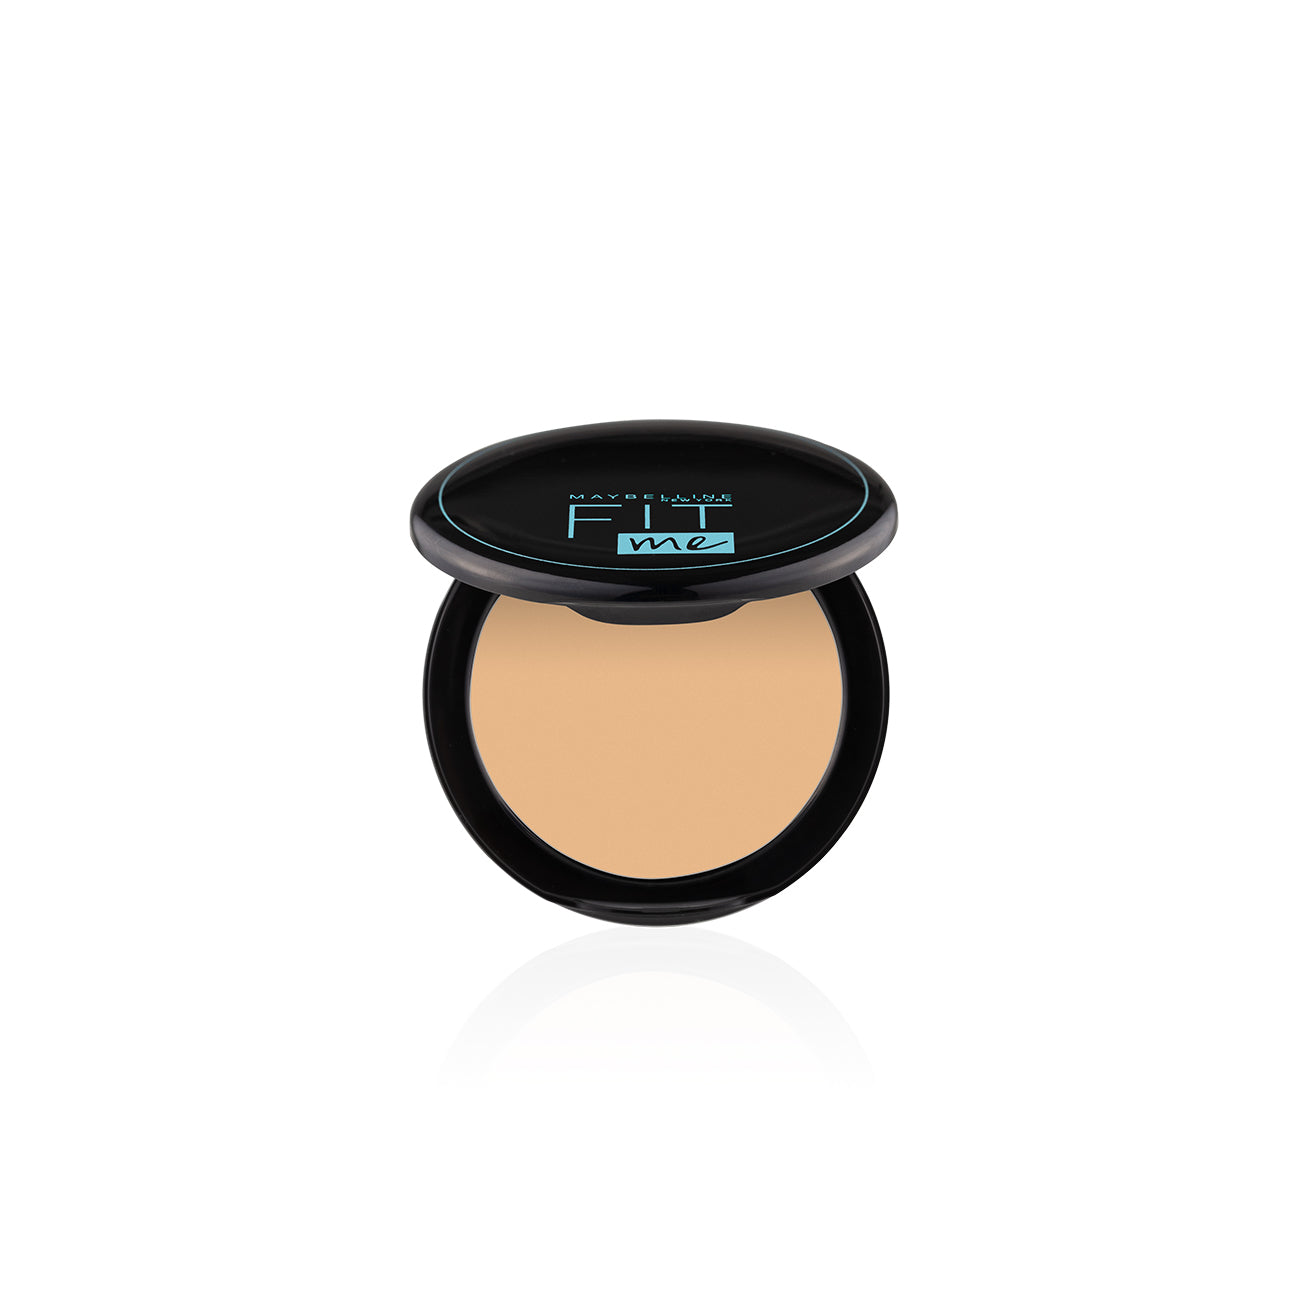 MAYBELLINE FIT ME COMPACT POWDER 128